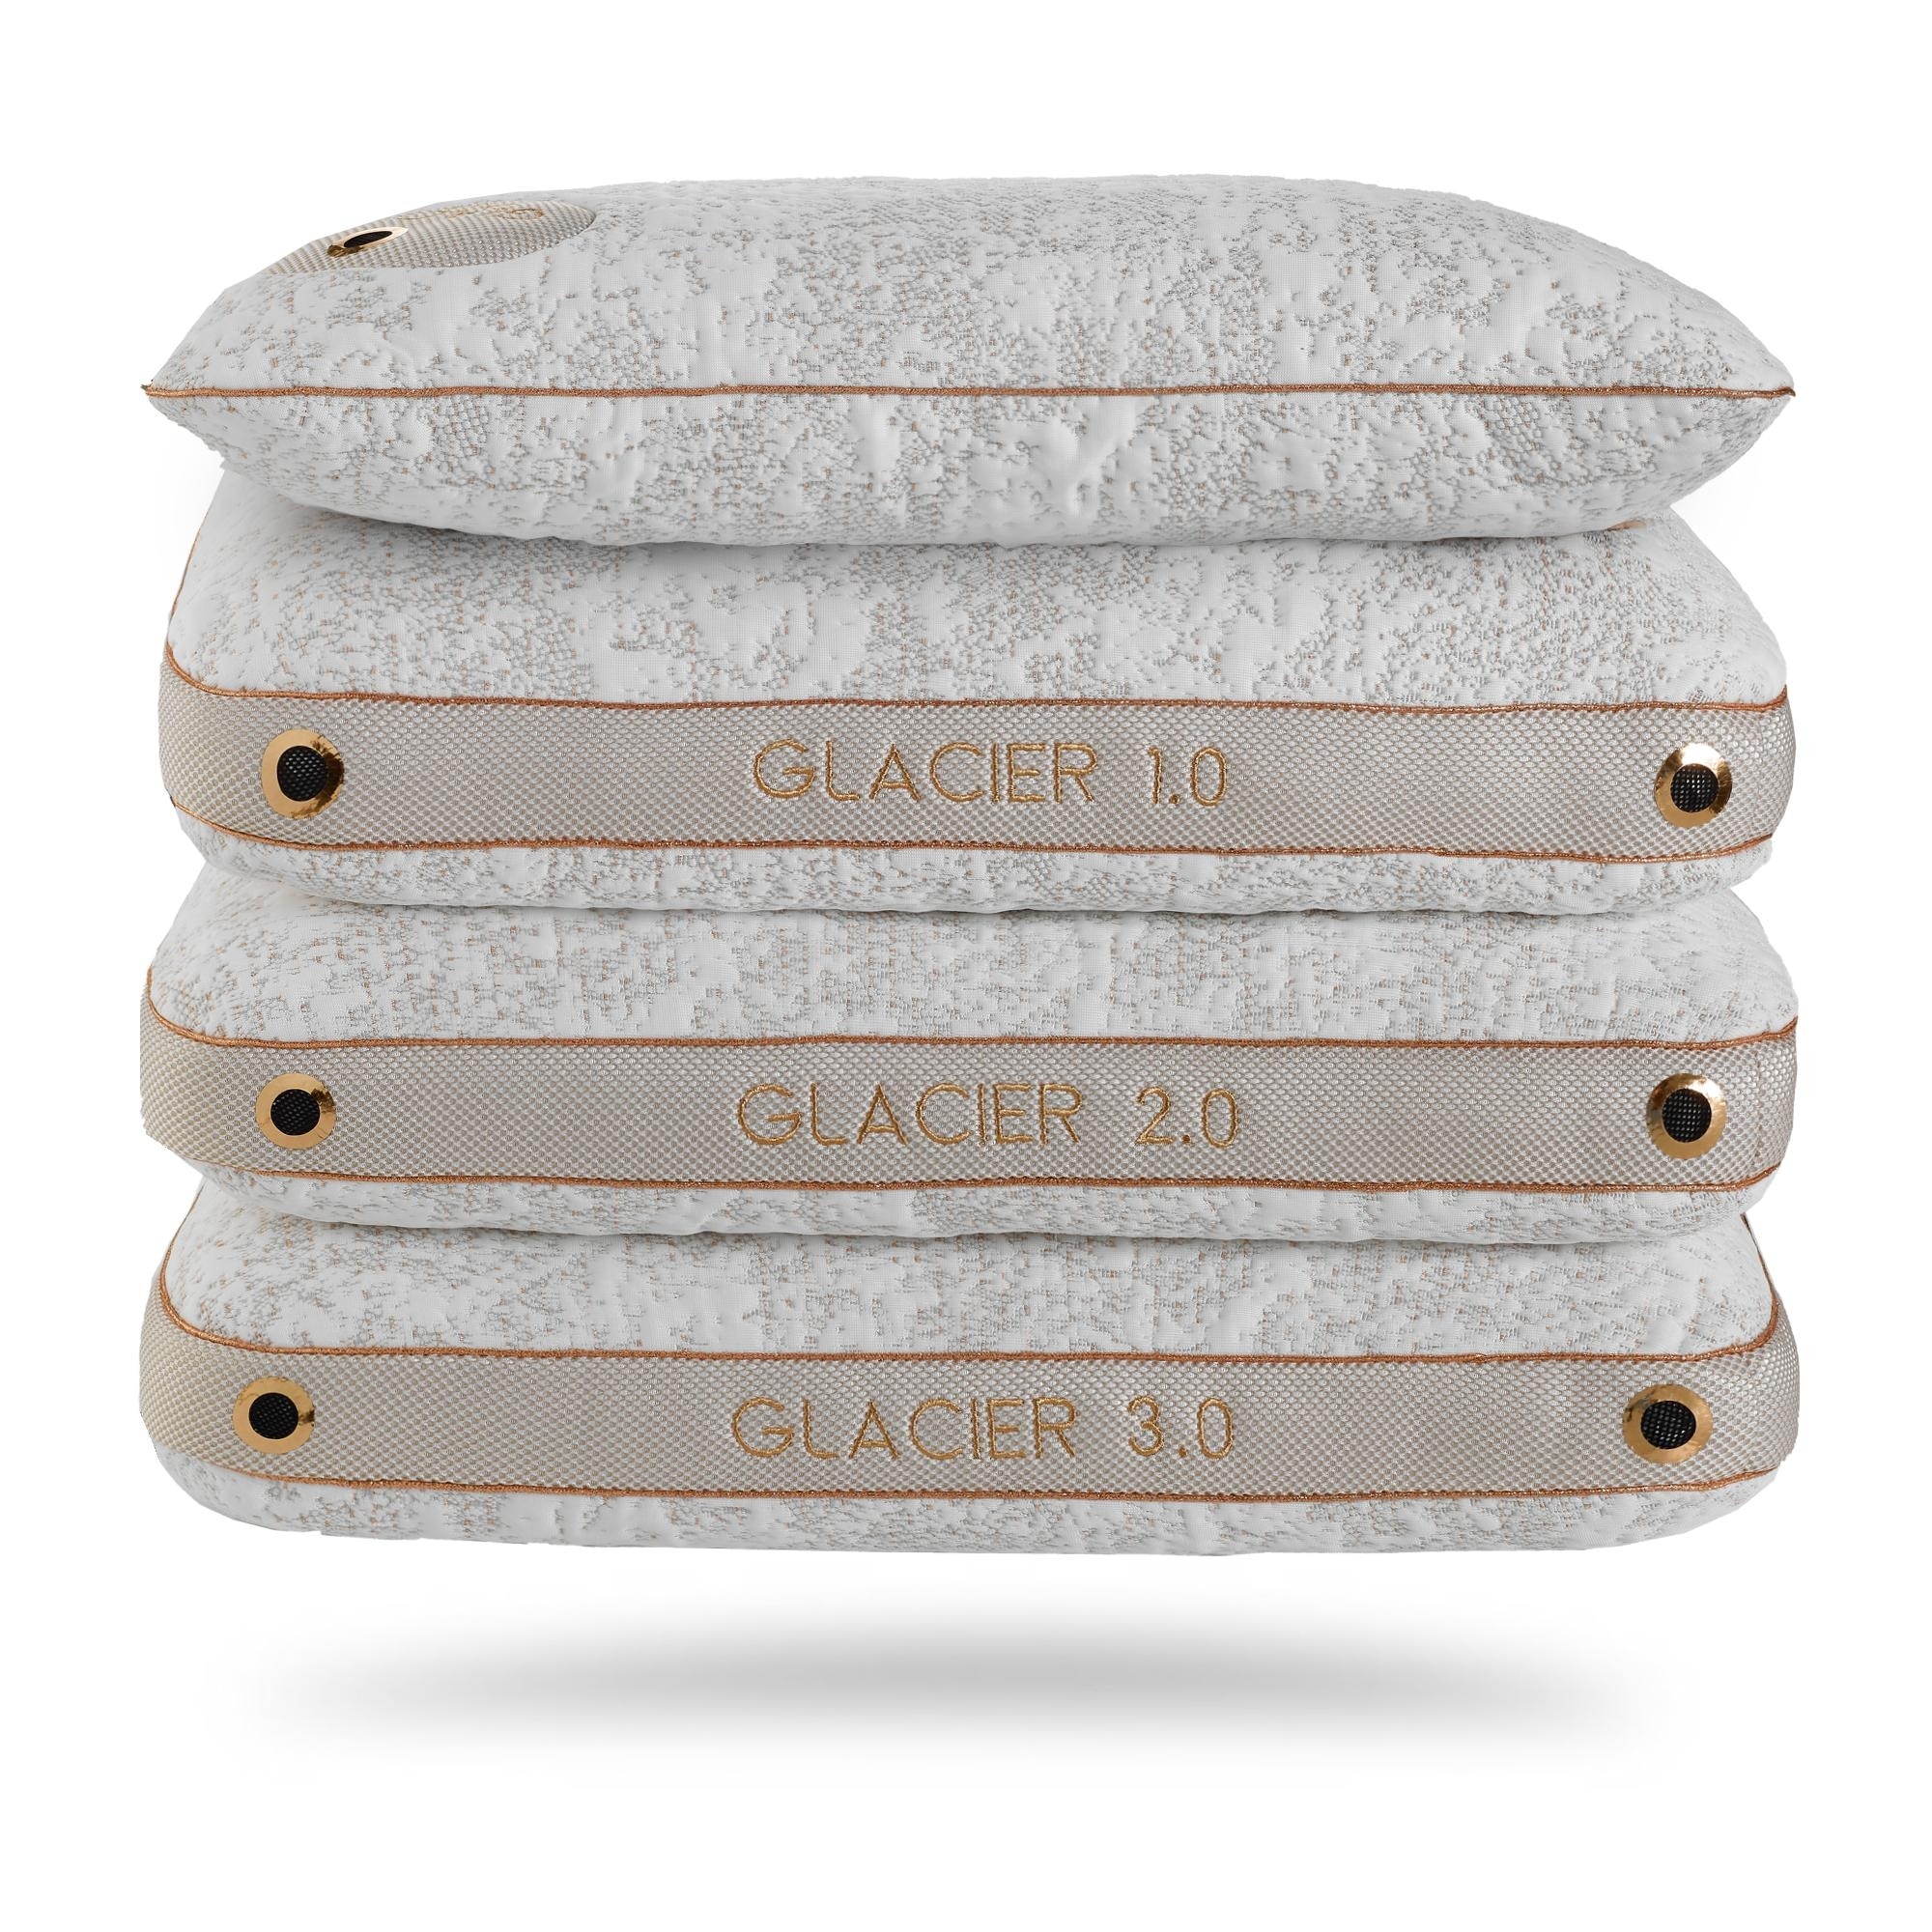 https://ak1.ostkcdn.com/images/products/is/images/direct/294c495f1aff8913b65b0f60cf594ebc071bc247/Bedgear-Glacier-Performance-Pillow---Sizes-1.0%2C-2.0-and-3.0---Medium-Soft-Support-Pillow-for-Warm-Hot-Sleepers.jpg